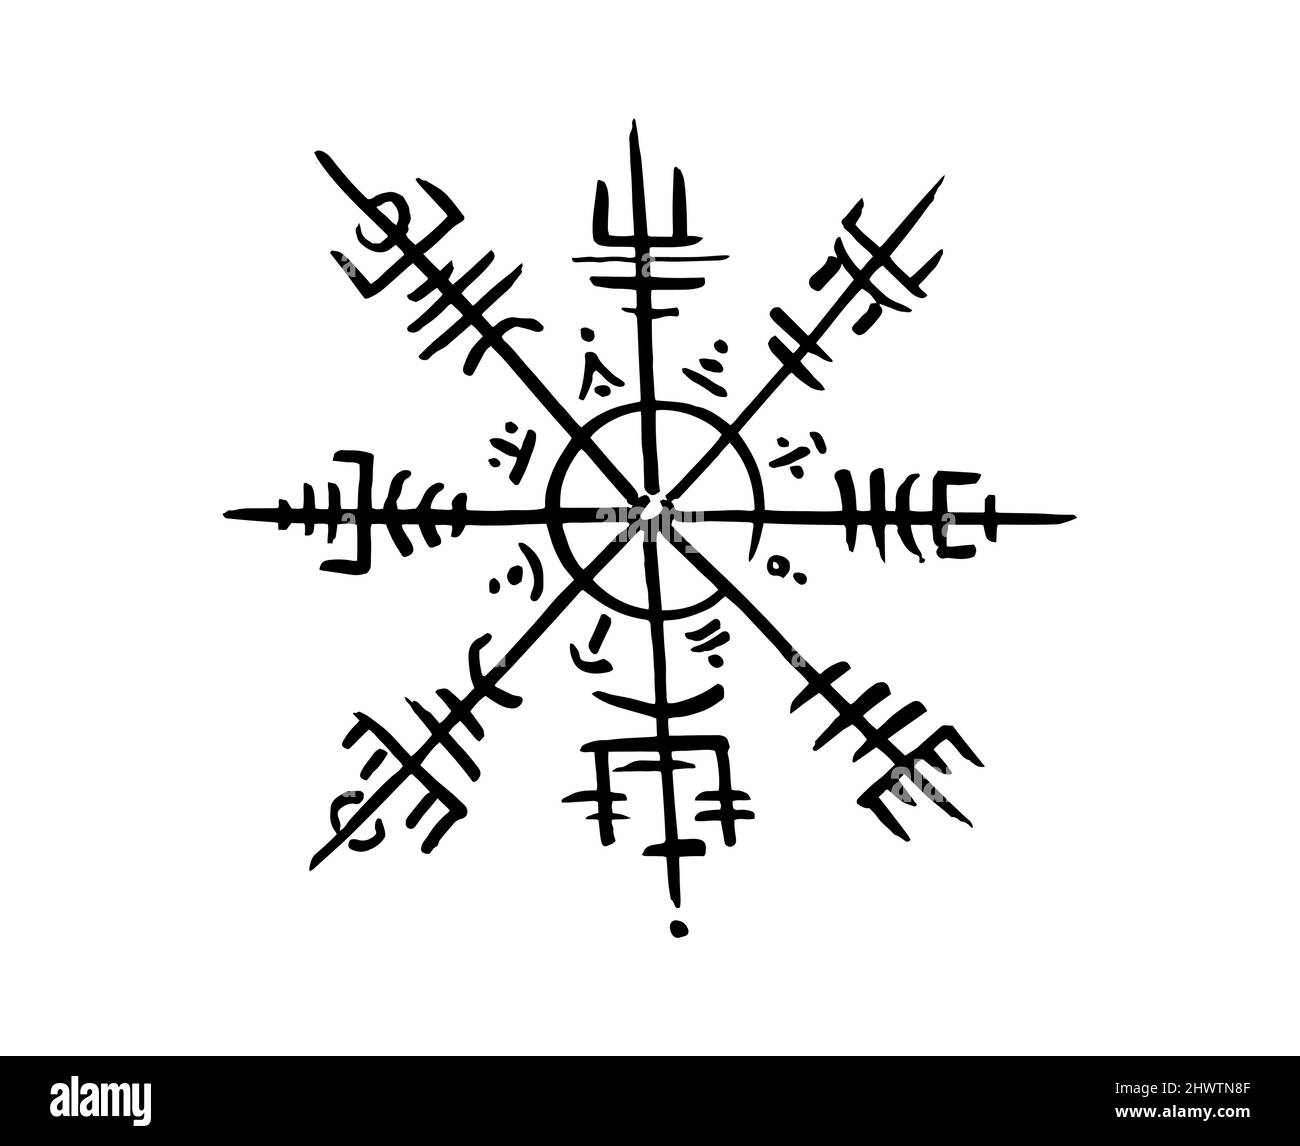 4,483 Compass Vector Tattoo Royalty-Free Photos and Stock Images |  Shutterstock